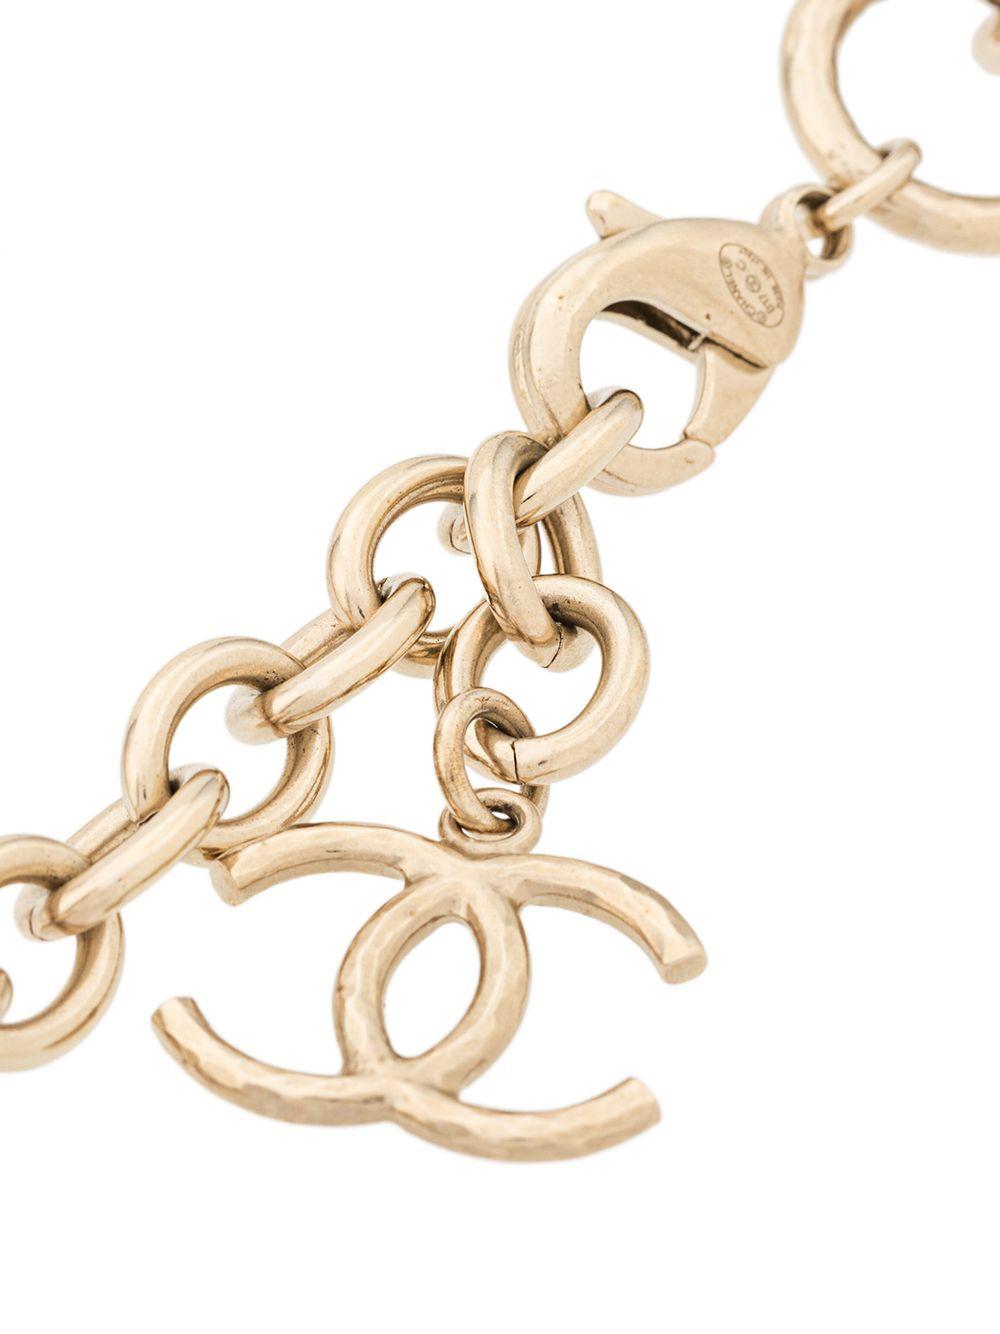 Crafted in France, this elegant, pre-owned necklace from Chanel is a unique piece that adds a touch of classic sophistication to any outfit. With distinctive lettered initial details contained within the gold-plated metal links of the chain spelling